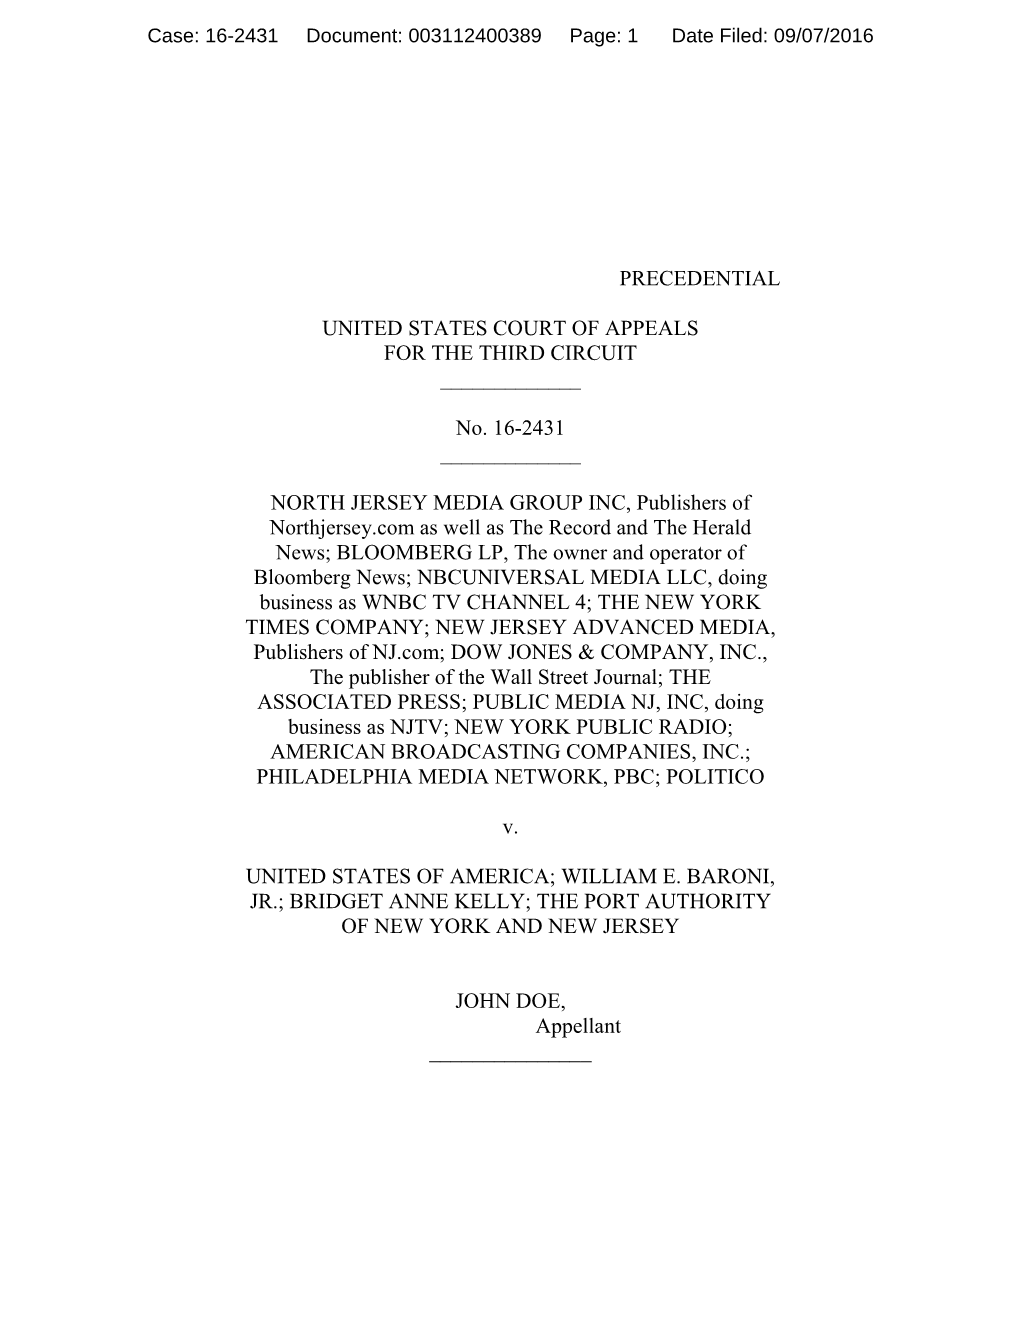 PRECEDENTIAL UNITED STATES COURT of APPEALS for the THIRD CIRCUIT ___No. 16-2431